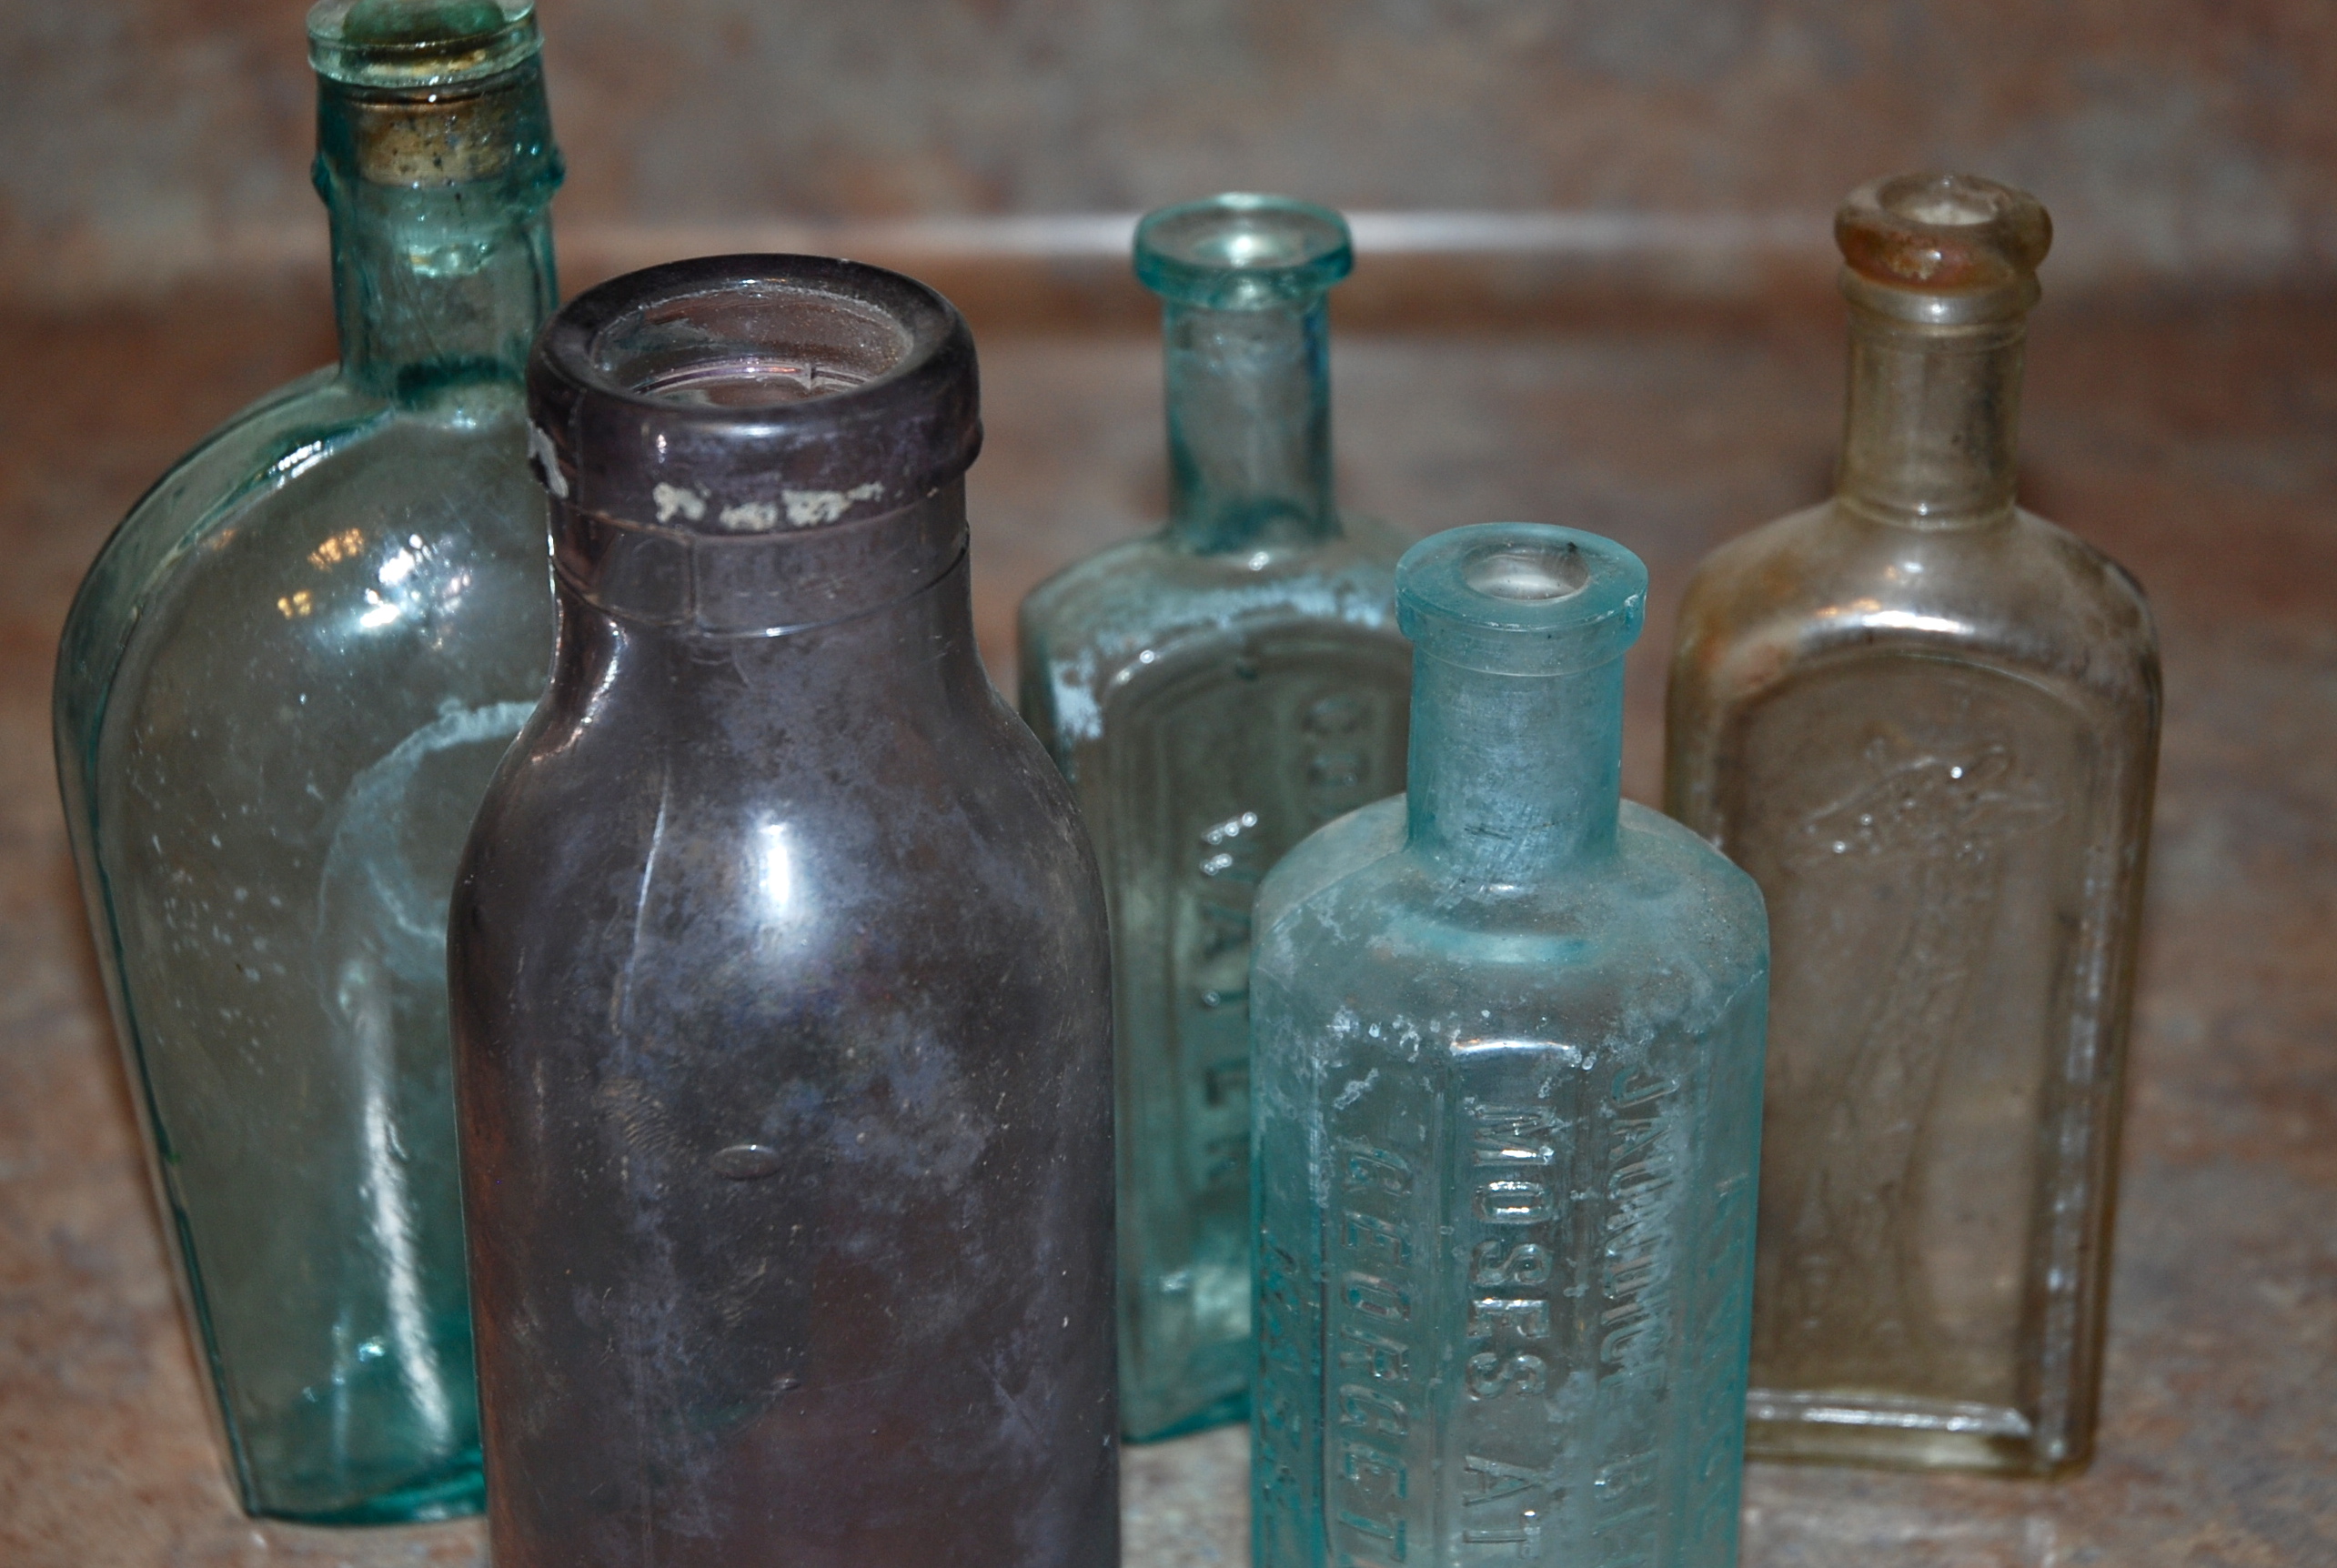 Cleaning Old Glass Bottles | Eyeballs By Day, Crafts By Night